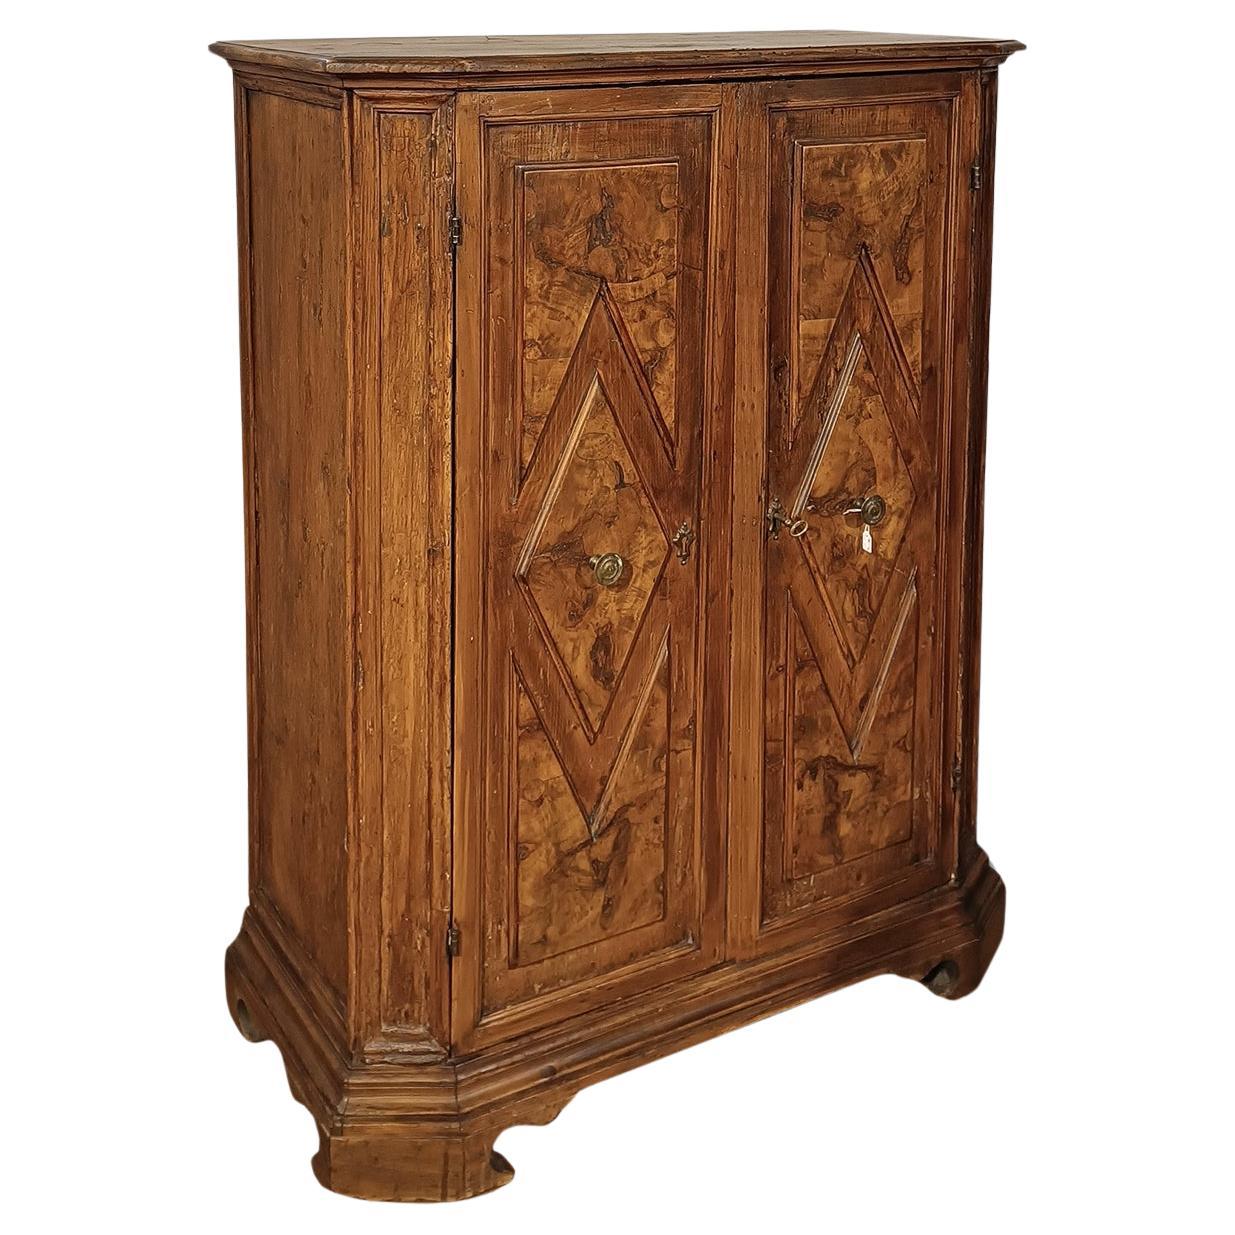 SECOND HALF OF THE 18th CENTURY WALNUT BRIAR CABINET  For Sale